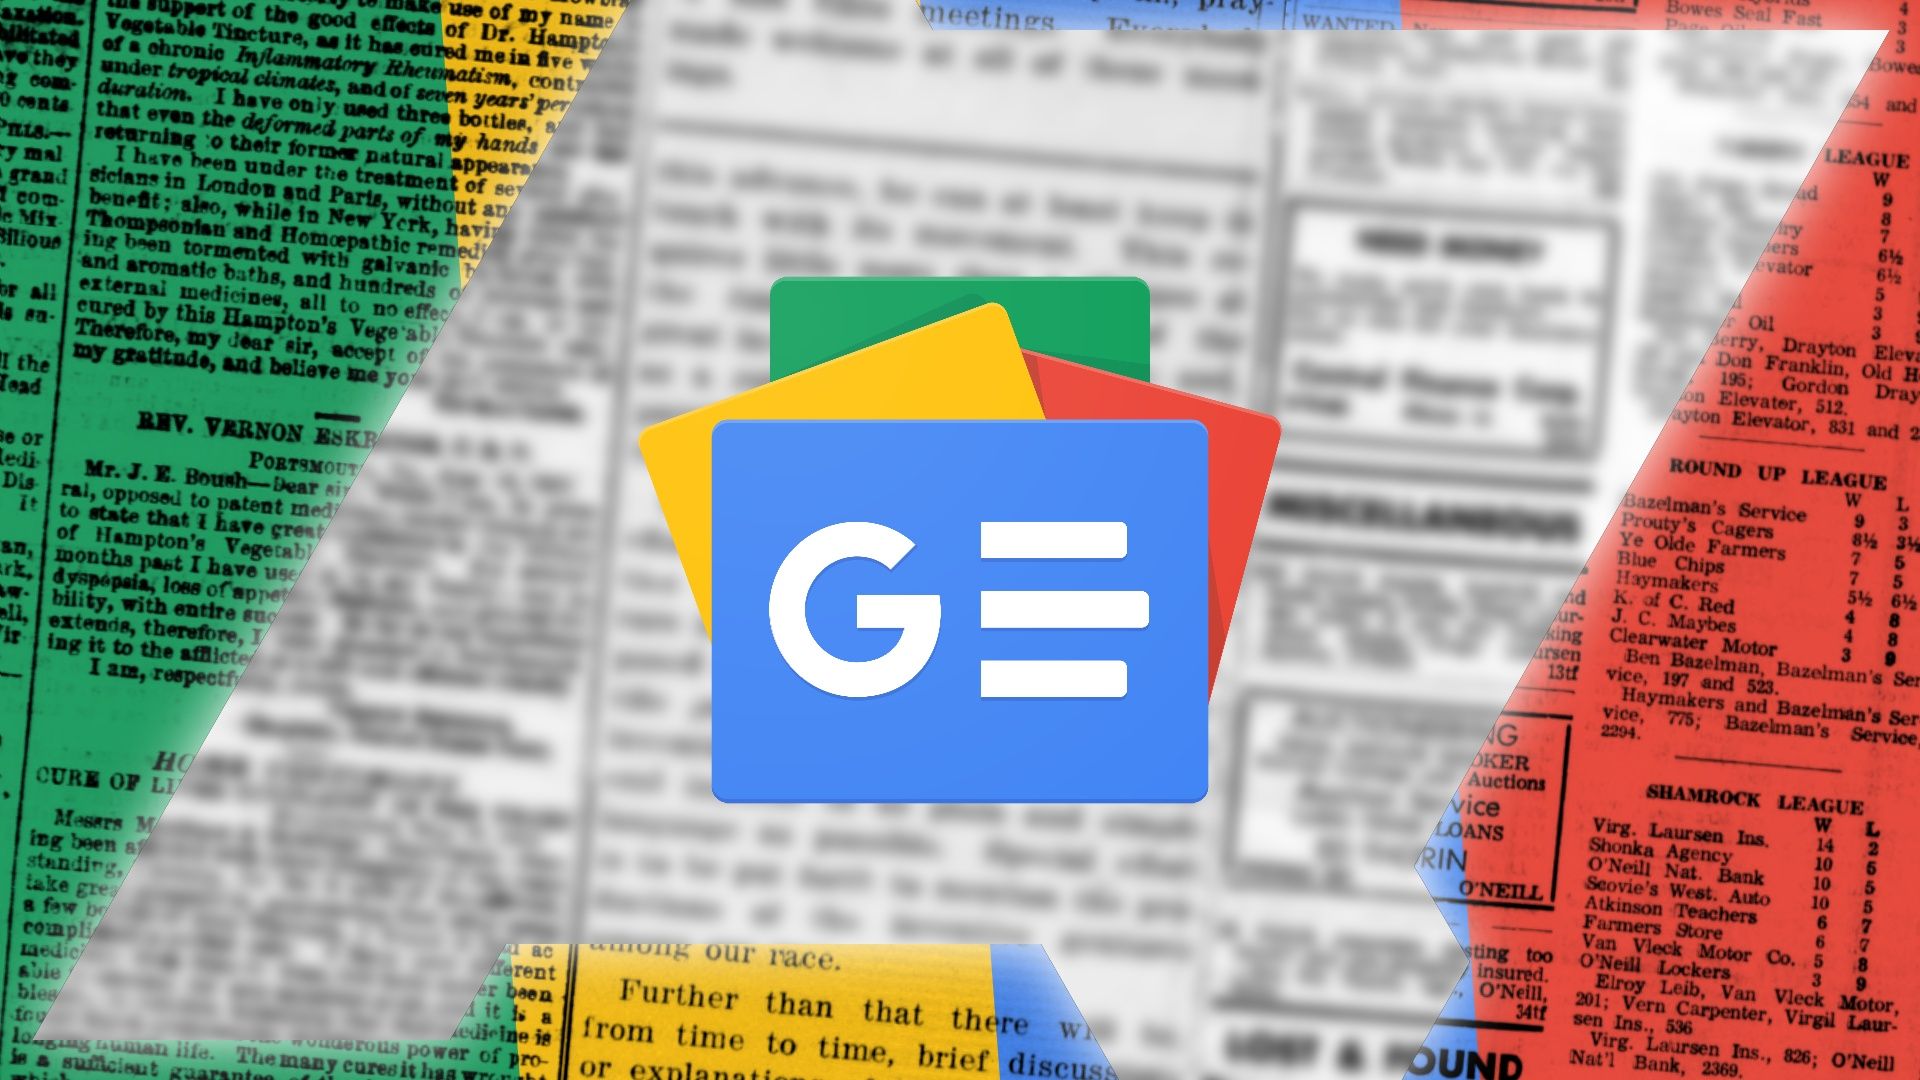 The Google News logo on top of newspaper pages